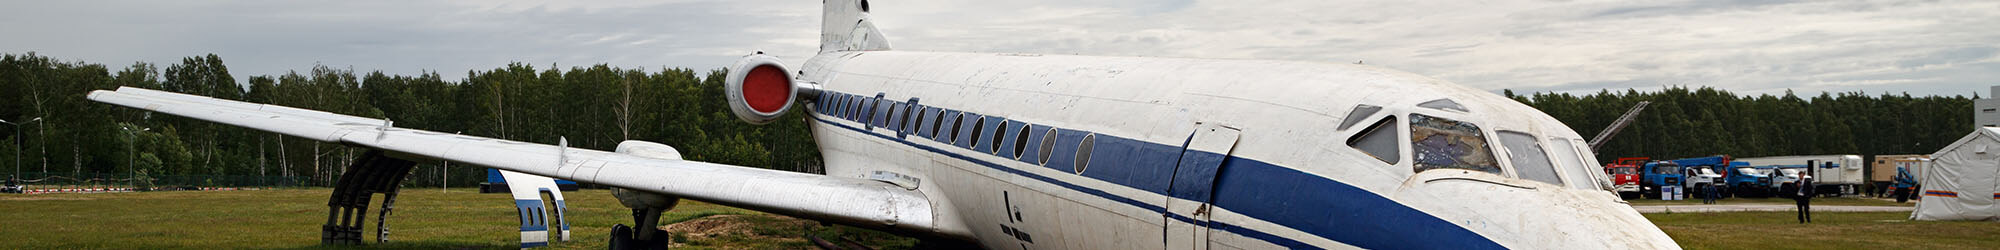 aviation accident attorneys in Morrow, GA